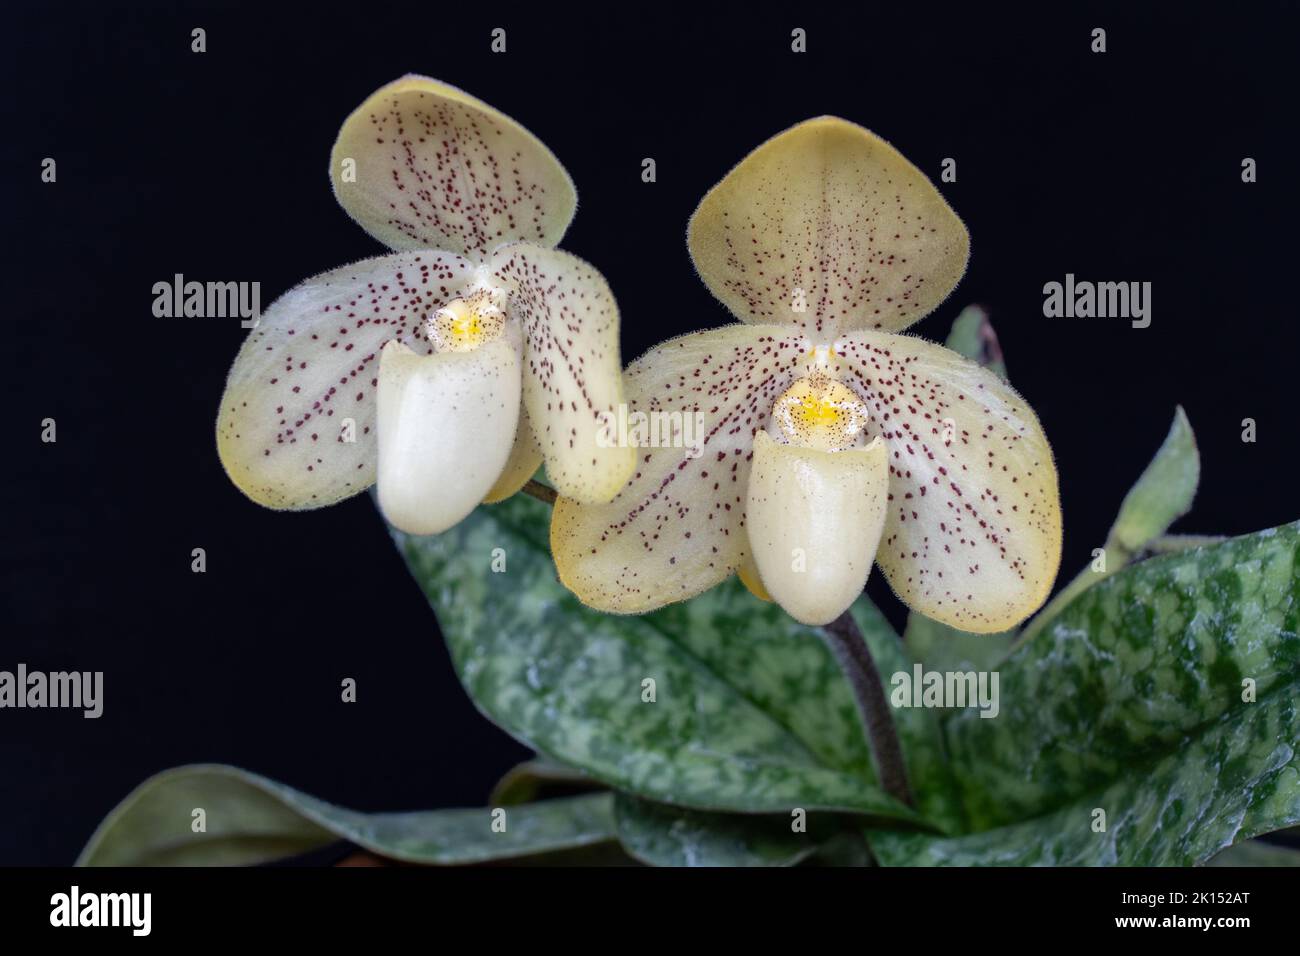 Closeup view of beautiful yellow with red dots blooming flowers of lady slipper orchid species paphiopedilum concolor isolated on black background Stock Photo